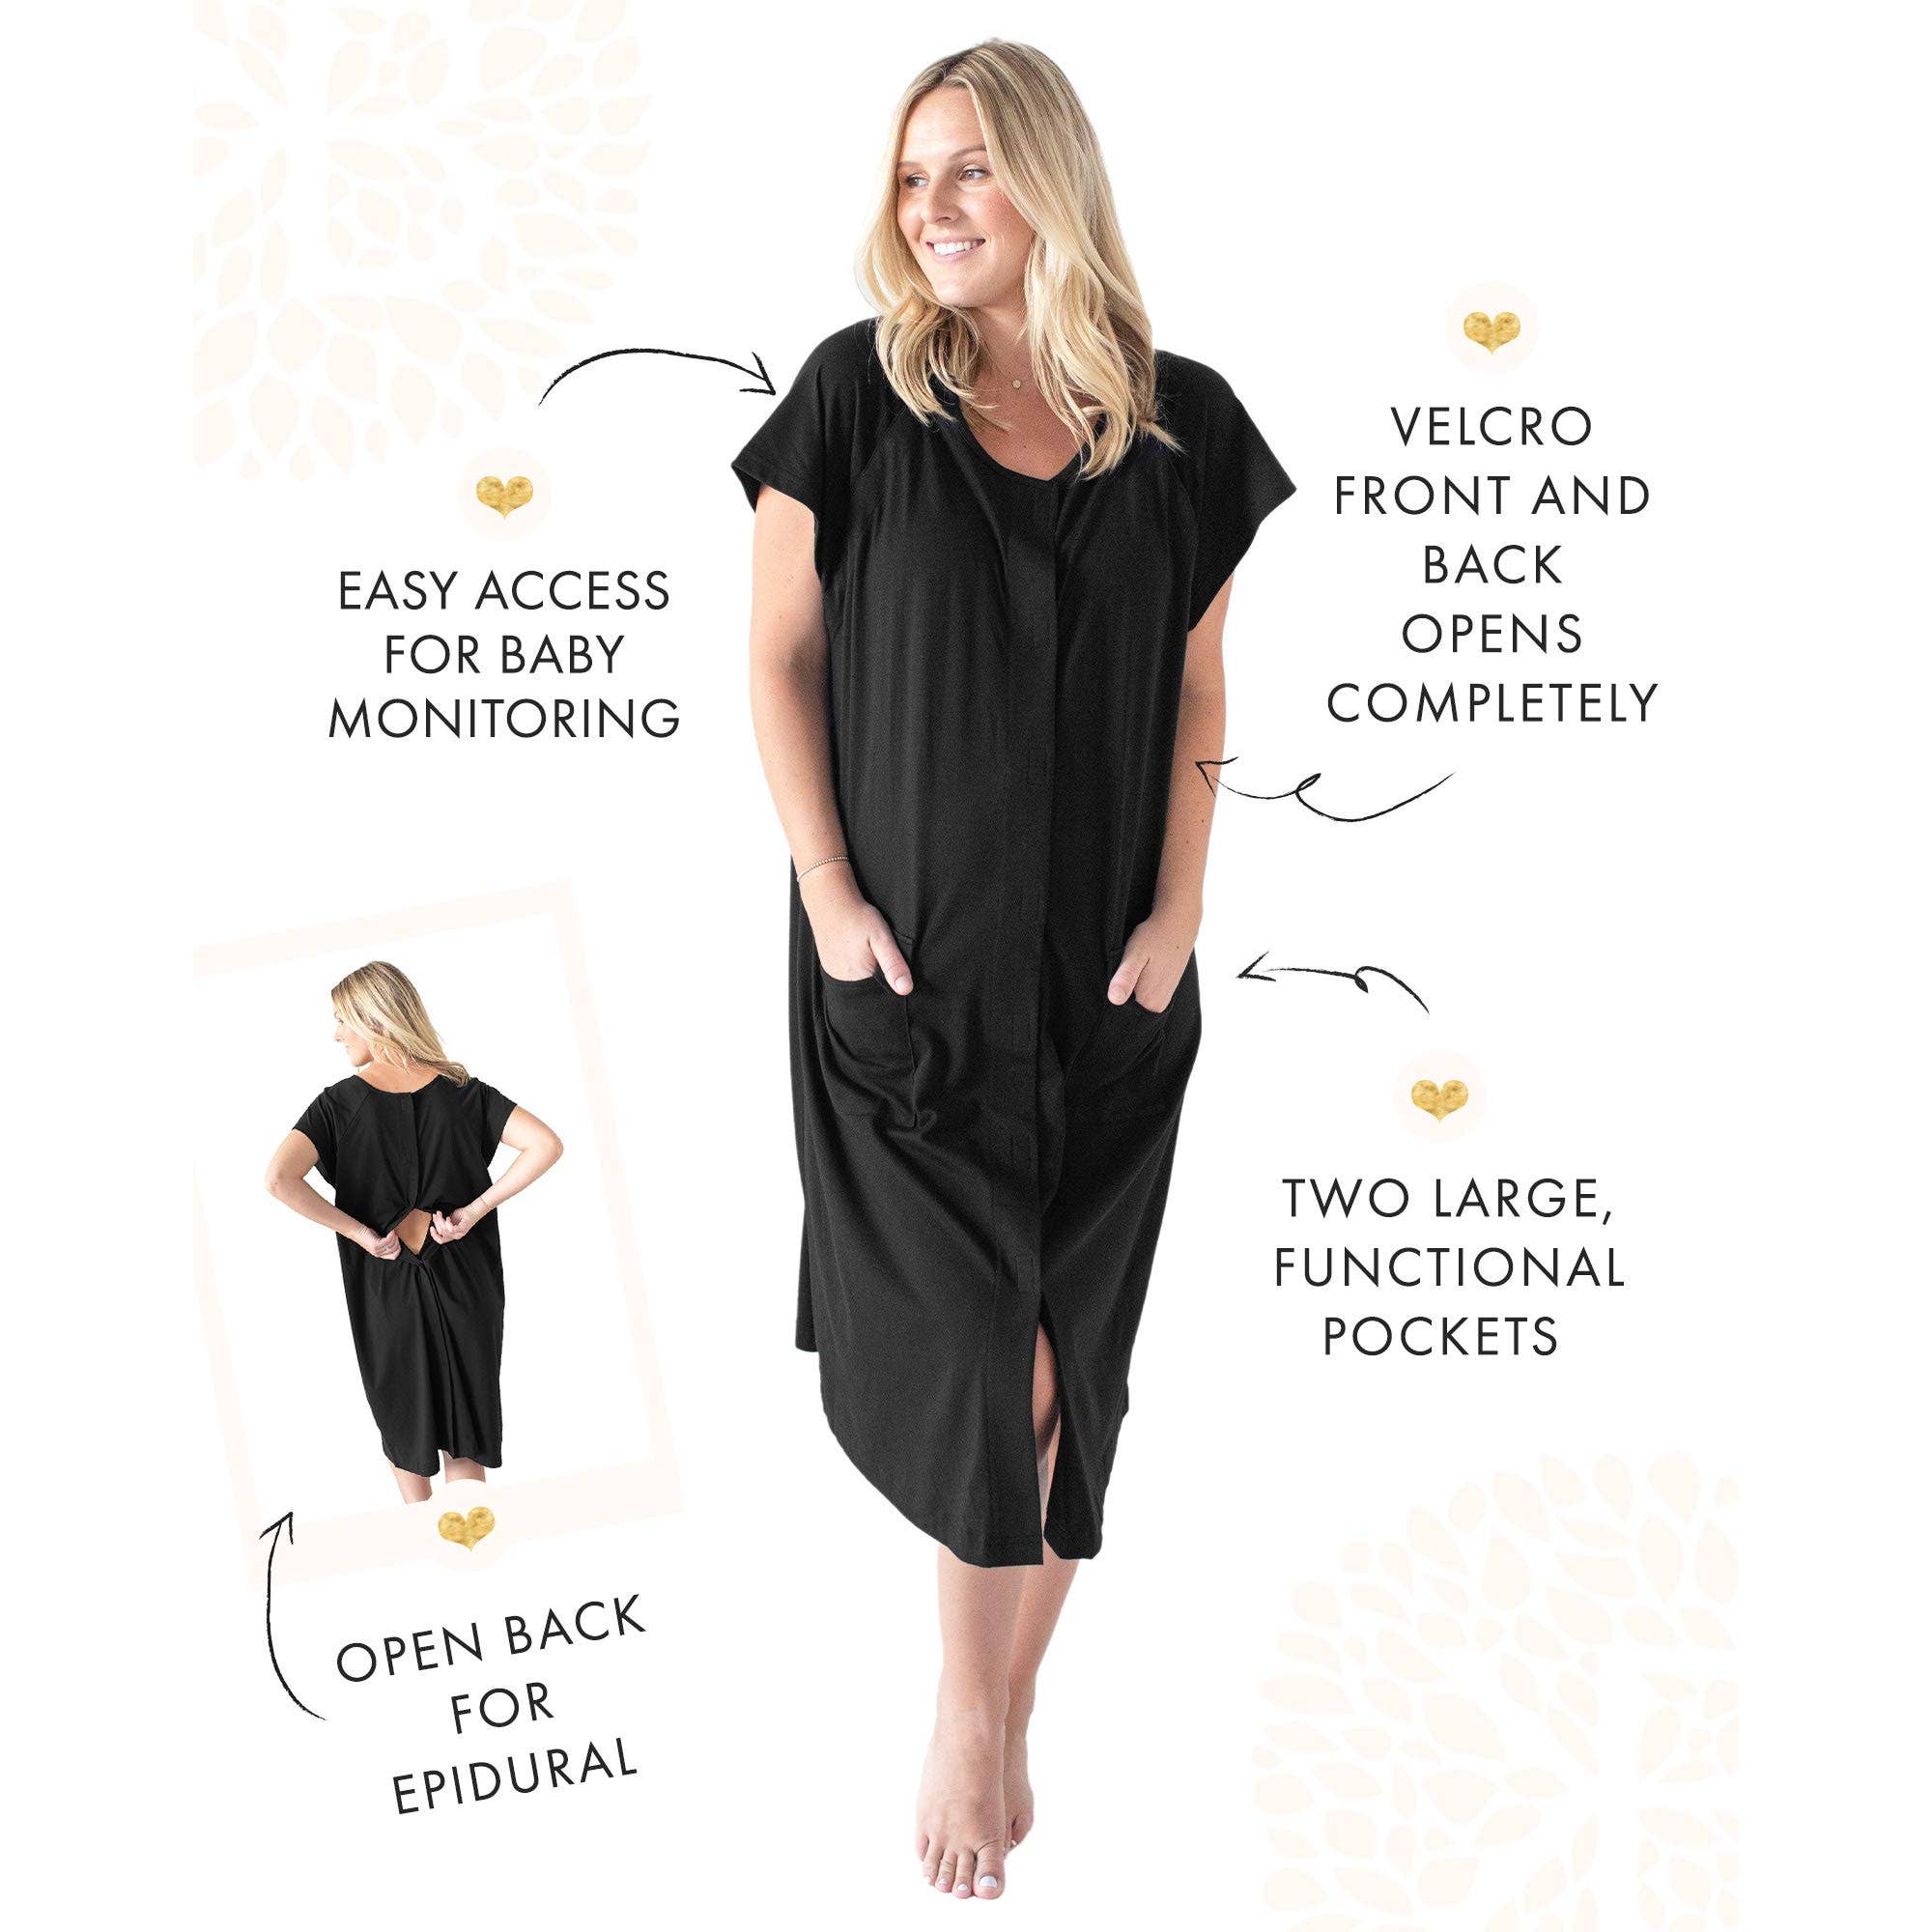 Kindred Bravely - Universal Labor and Delivery Gown In 1 Labor, Delivery- Black